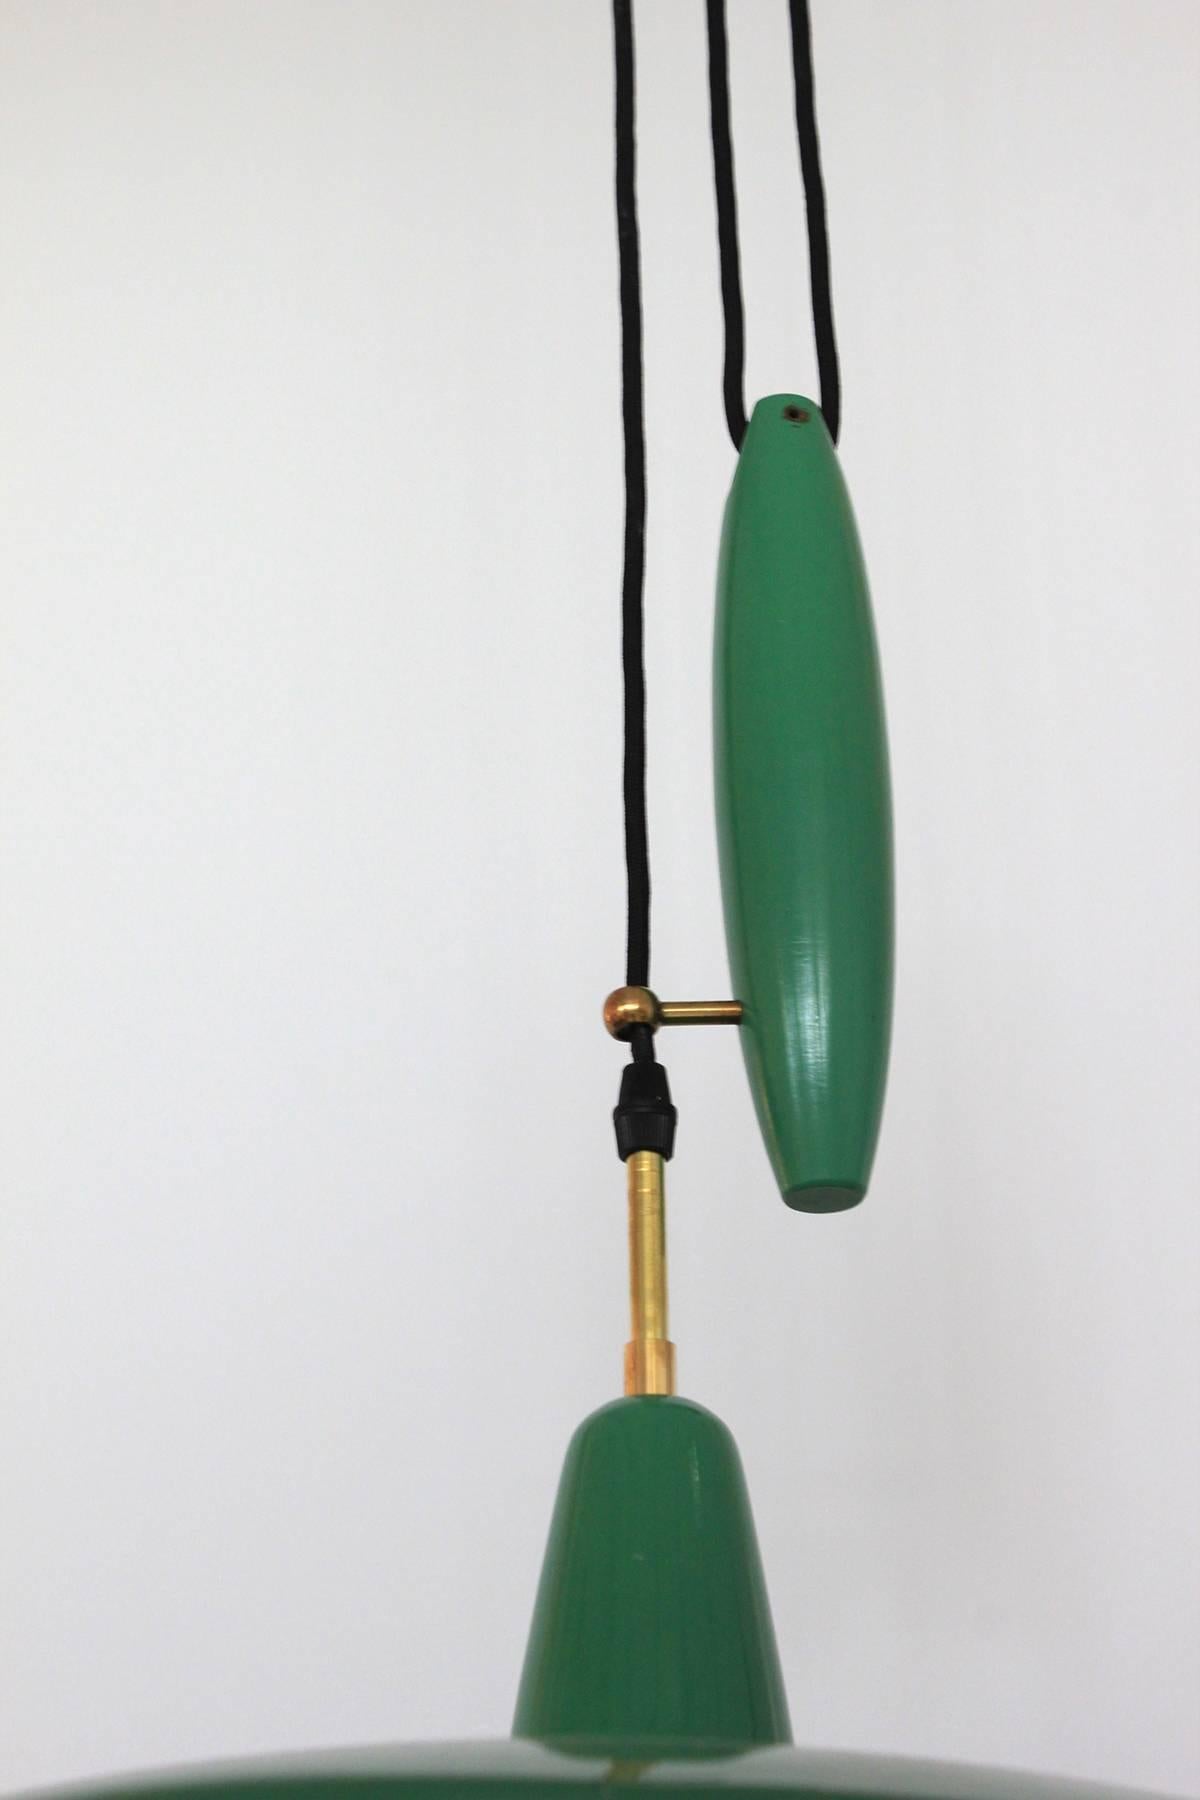 Wonderful Italian counterbalance pendant in original green color. Pulley allows pendant to go up and down with brass loop and brass hardware throughout.